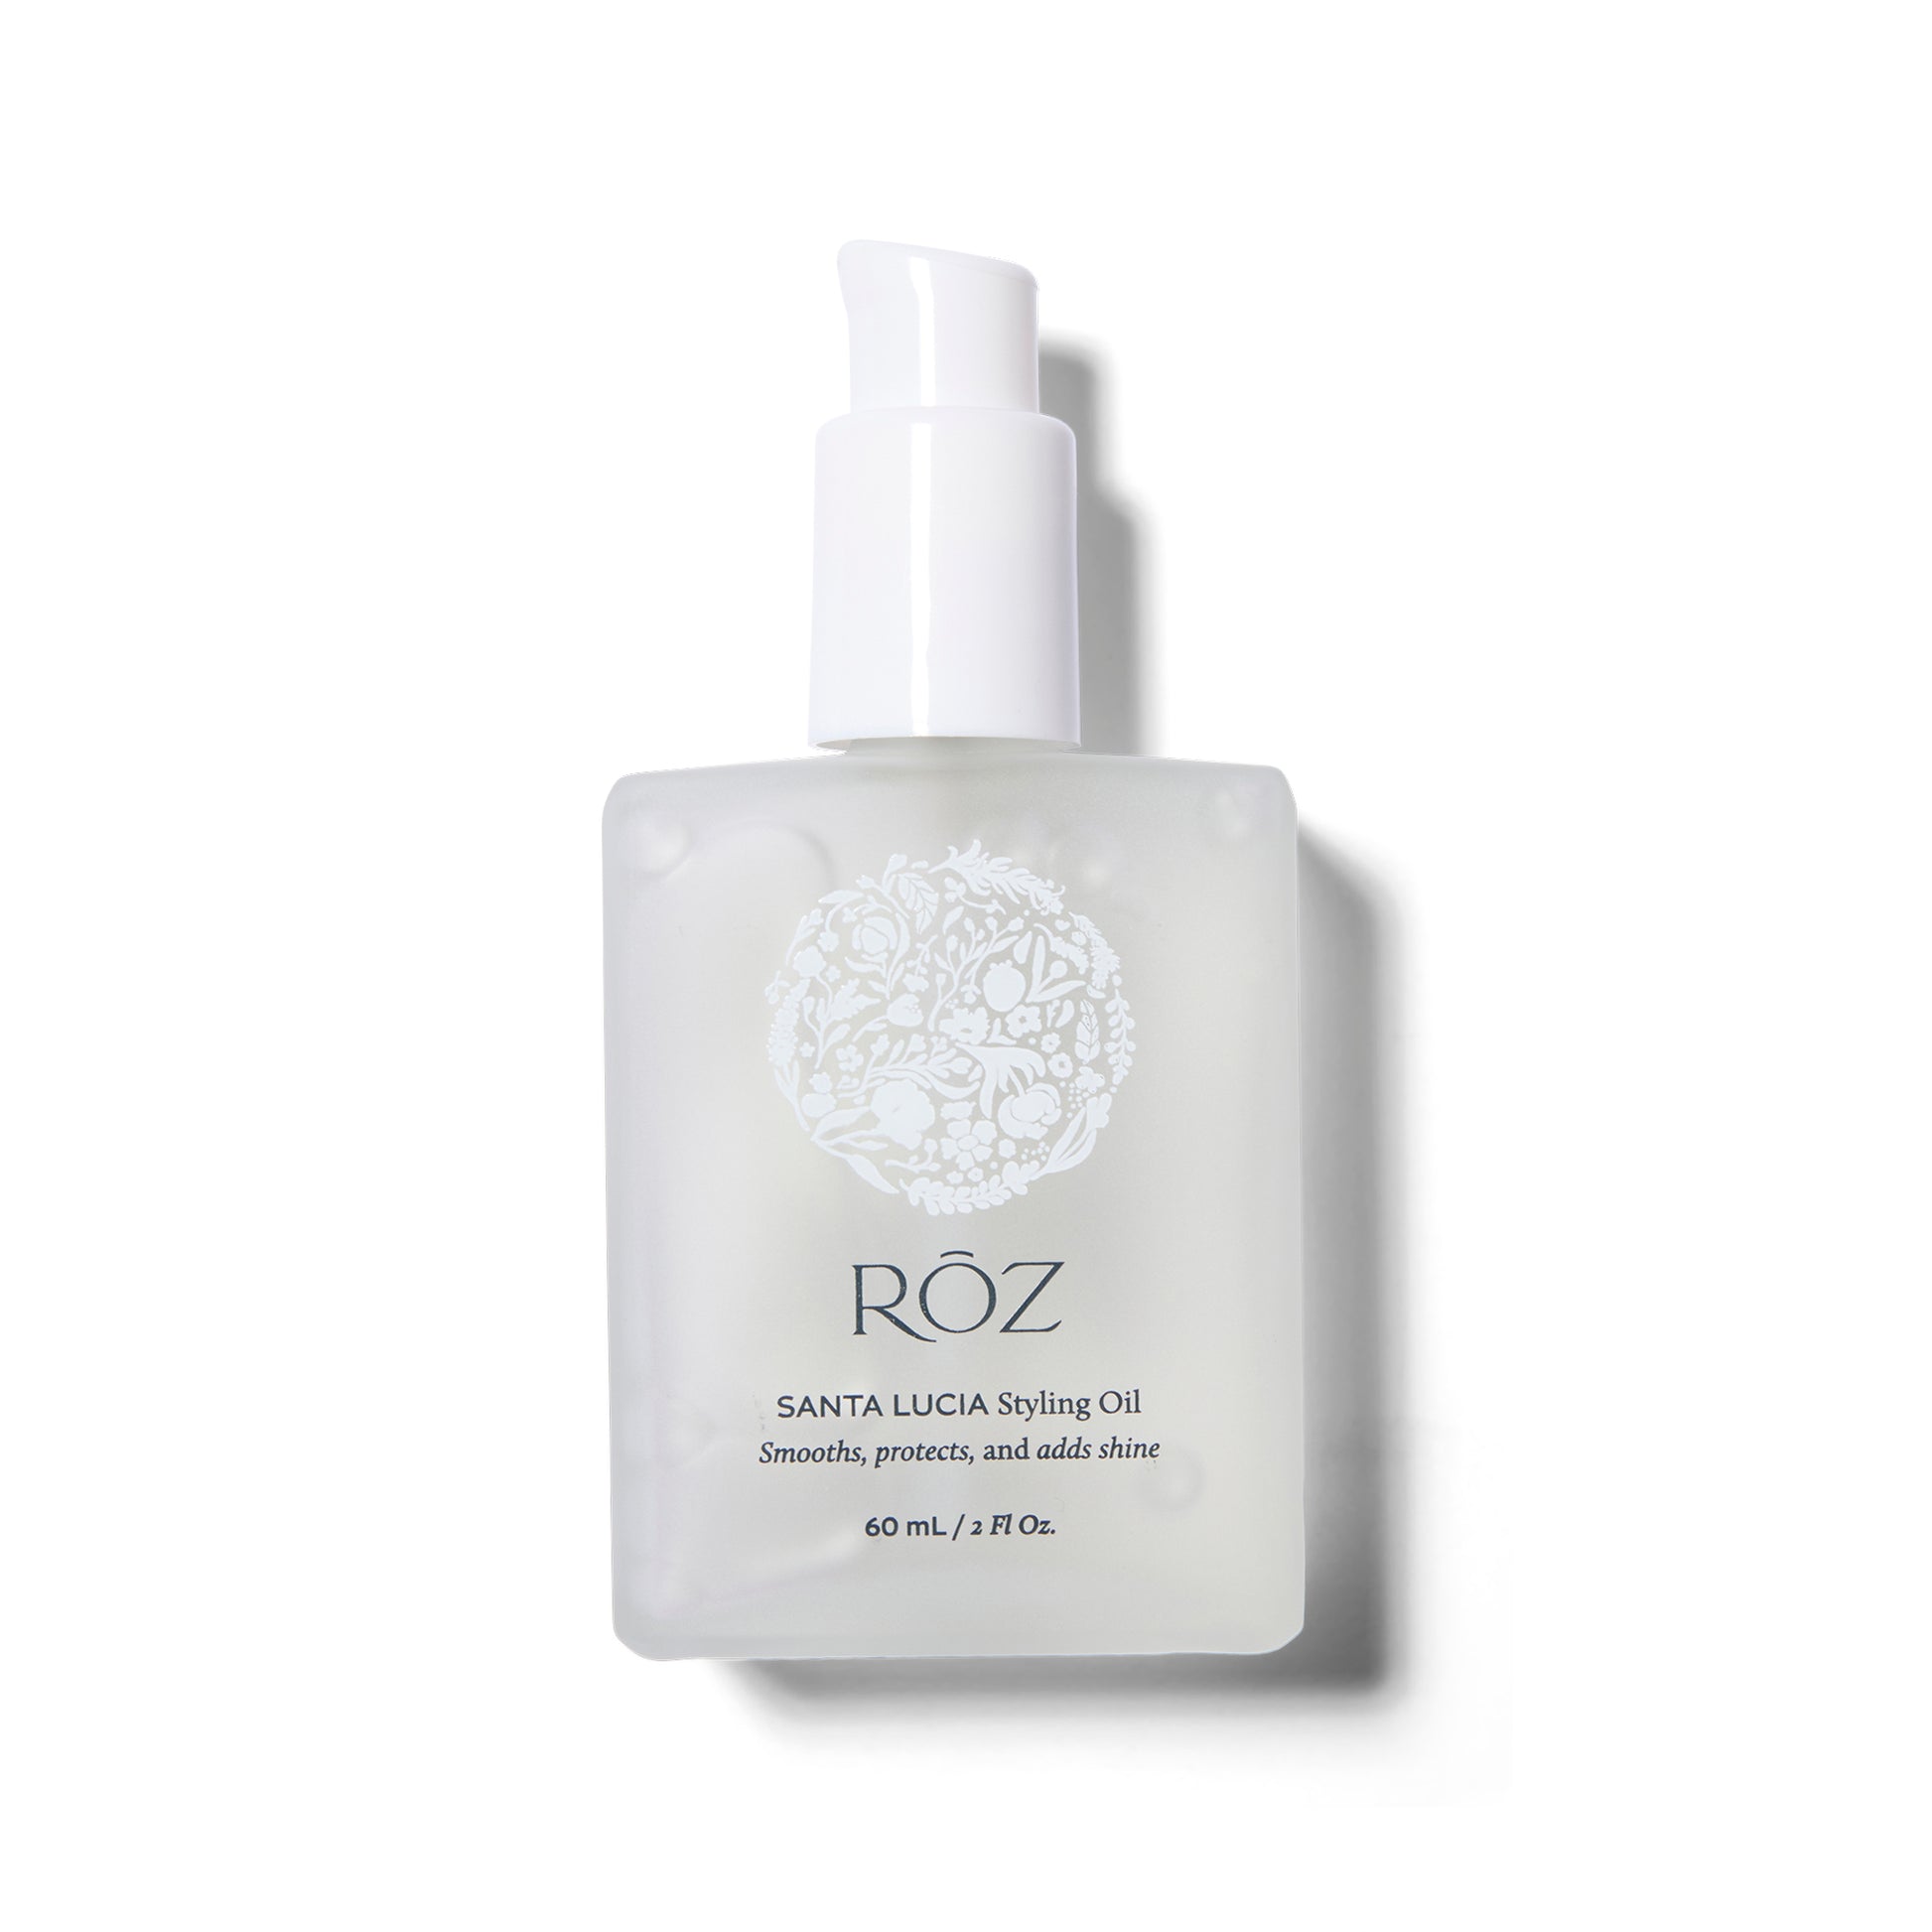 Front view of the ROZ Santa Lucia Styling Oil. The white frosted bottle is shown with the cap off. .